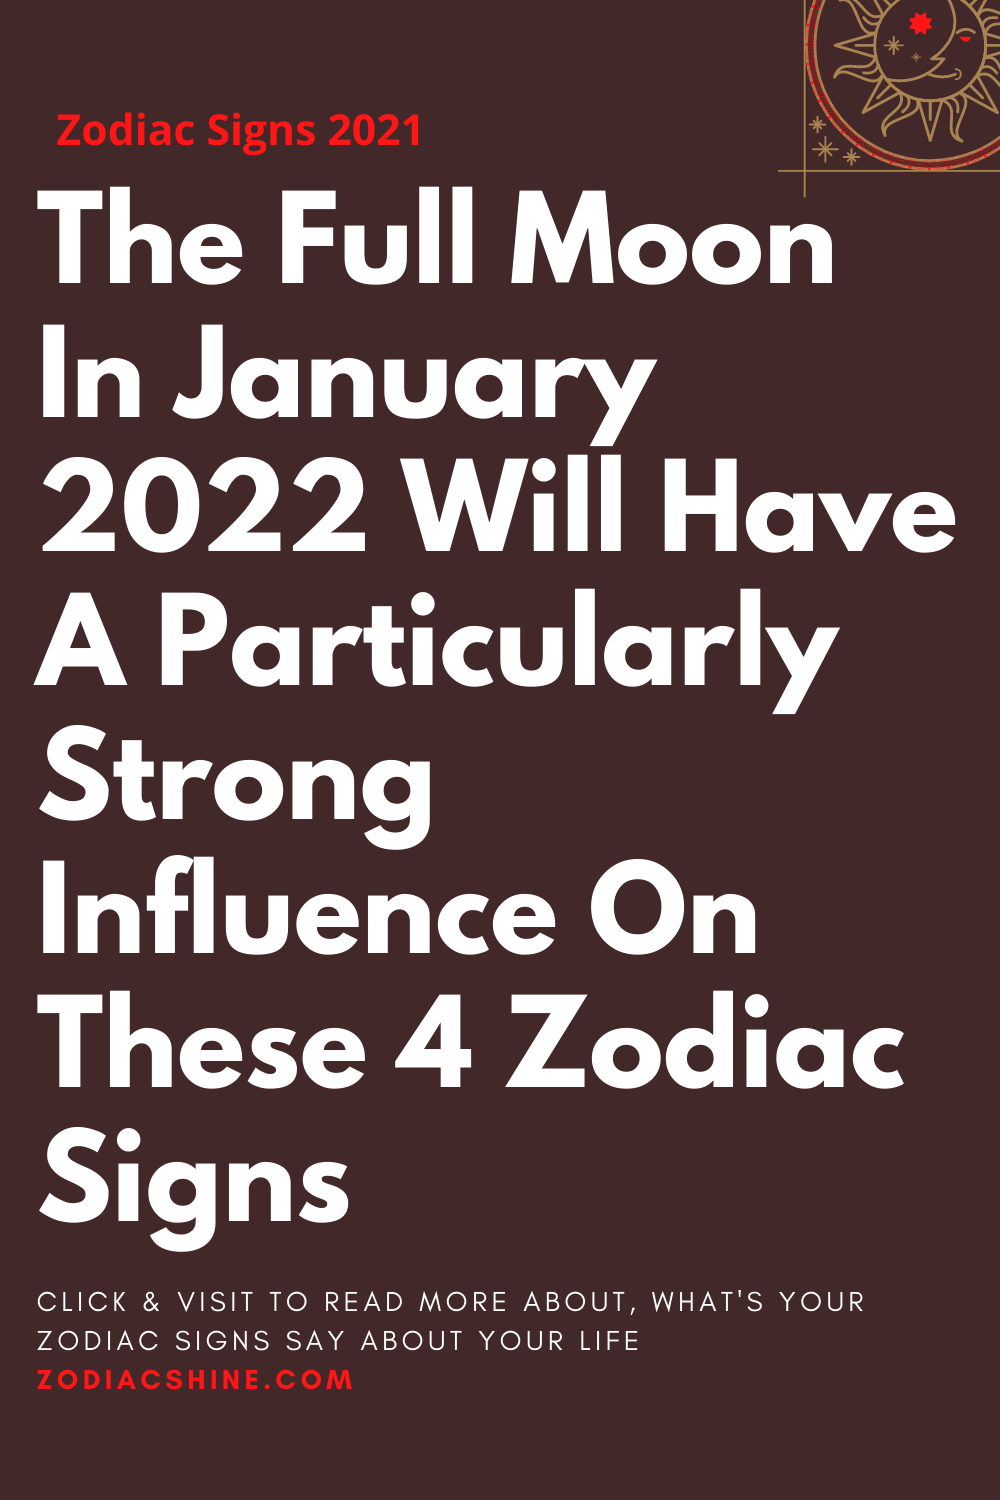 The Full Moon In January 2022 Will Have A Particularly Strong Influence On These 4 Zodiac Signs